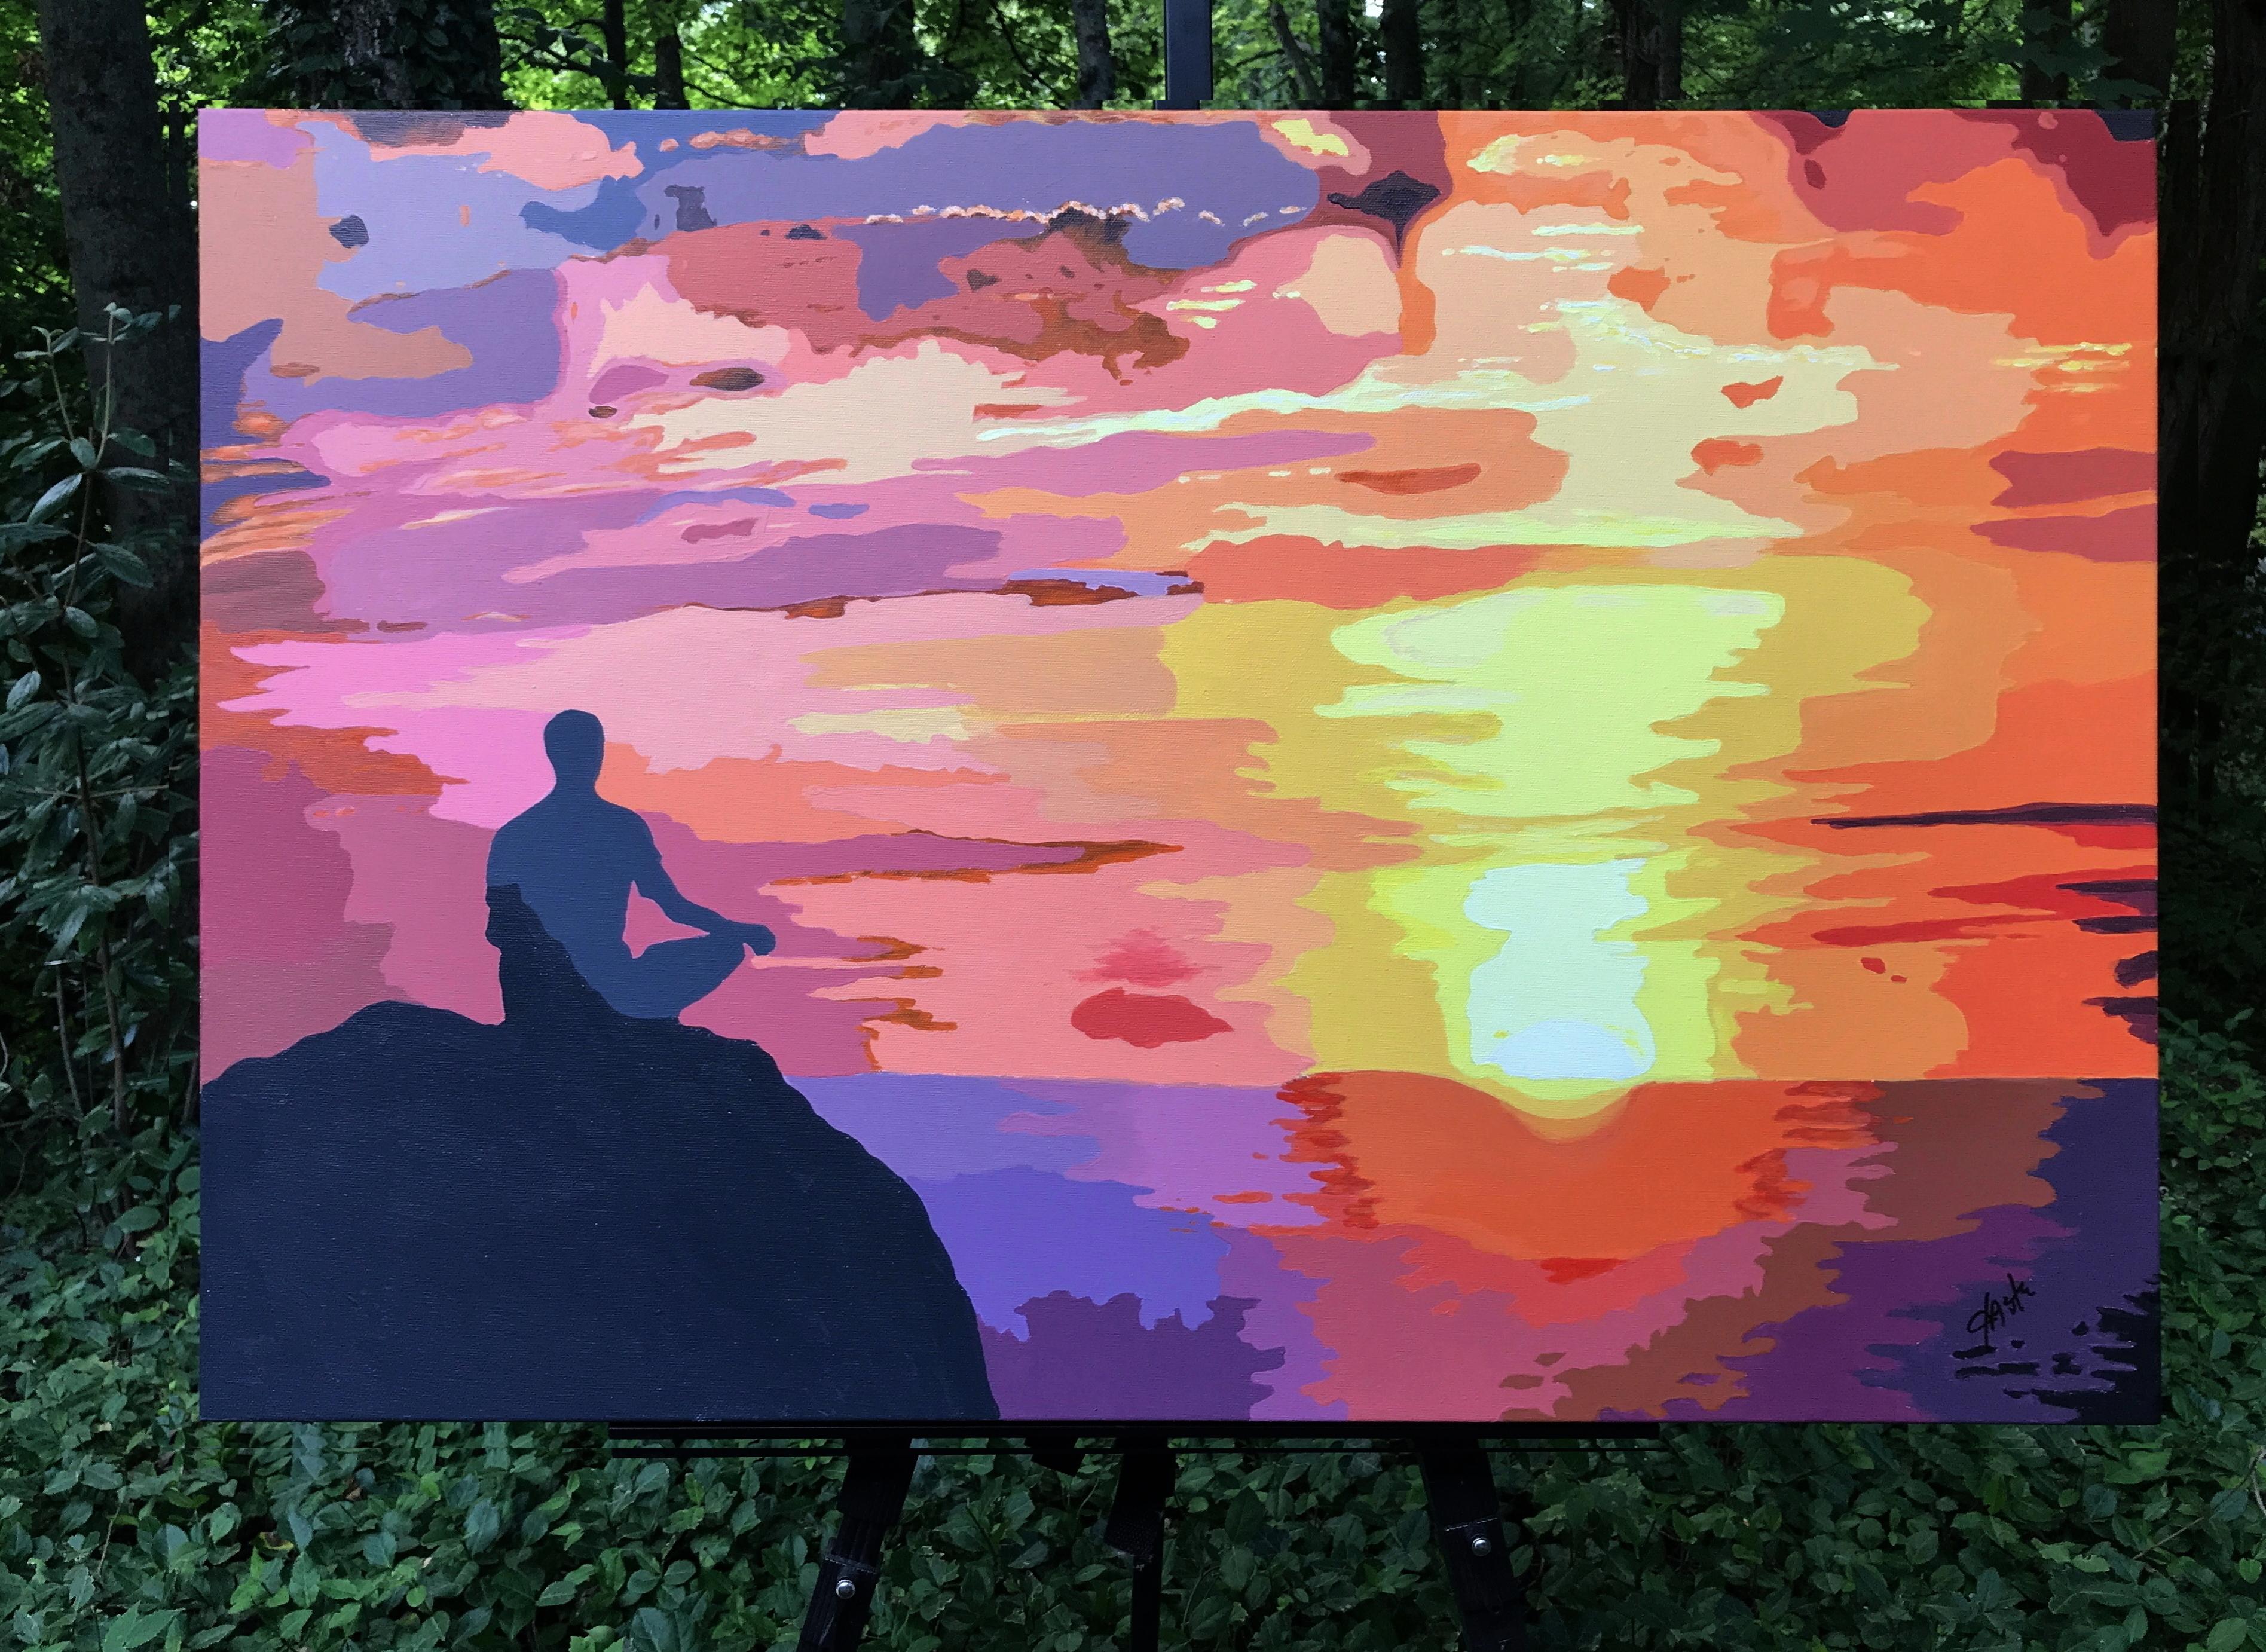 <p>Artist Comments<br>Artist John Jaster paints an introspective skyscape in brilliant colors. The blazing tones of a sunset explode on the fiery horizon. A silhouette of a man meditating on a boulder sits in the foreground. He contemplates the